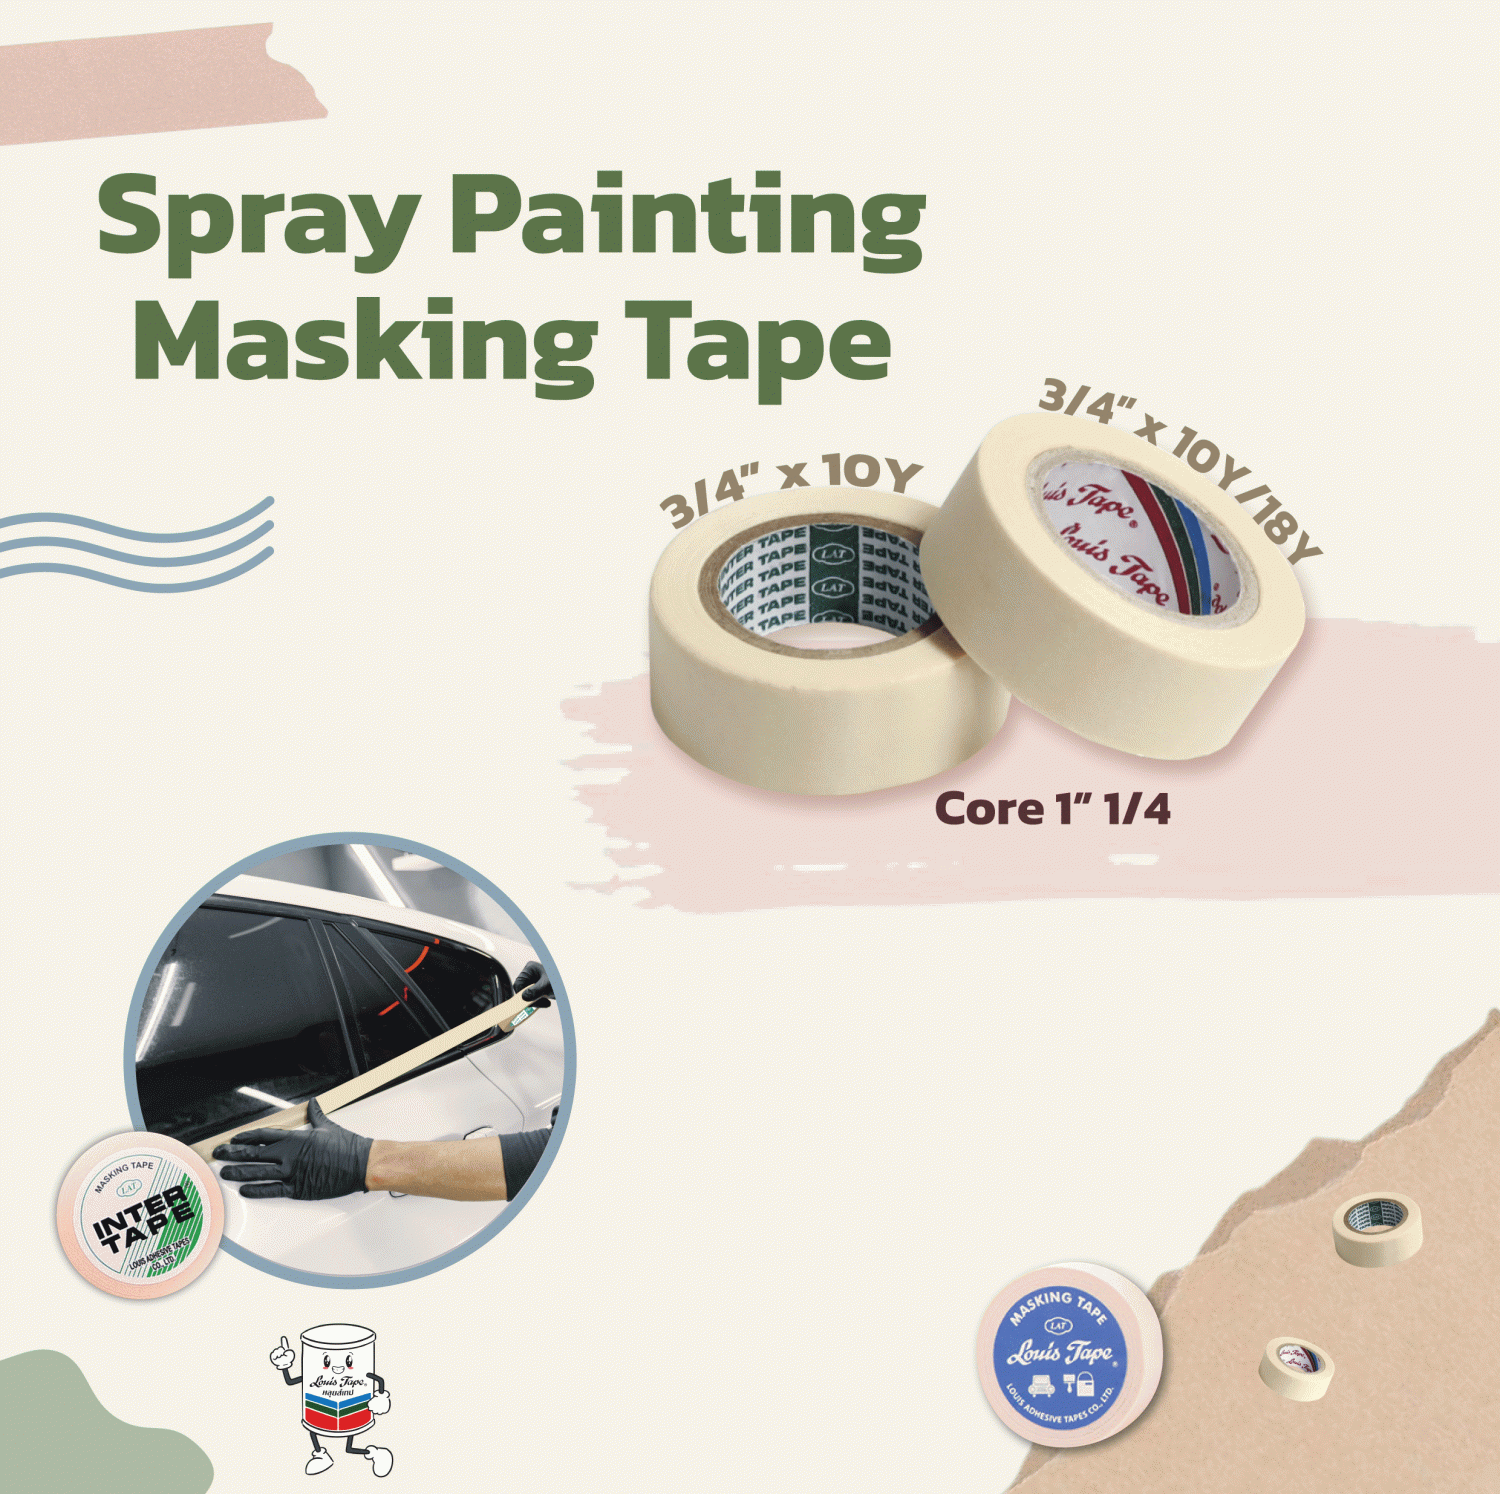 Low Tack Colored Crepe Paper Painters Masking Tape